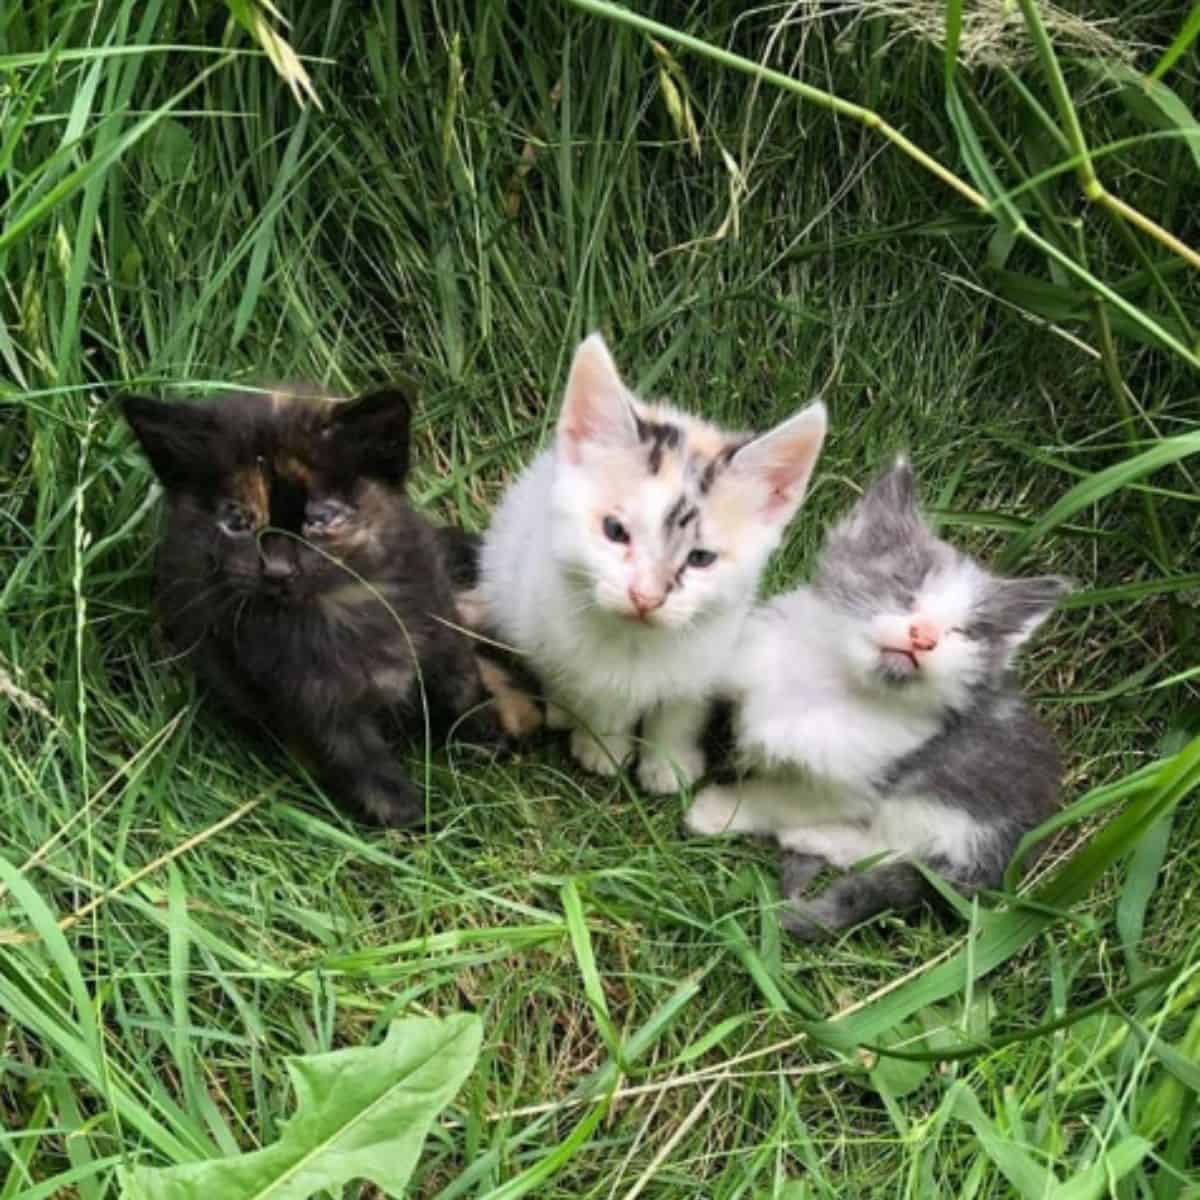 photo of three adorable stray kittens in grass